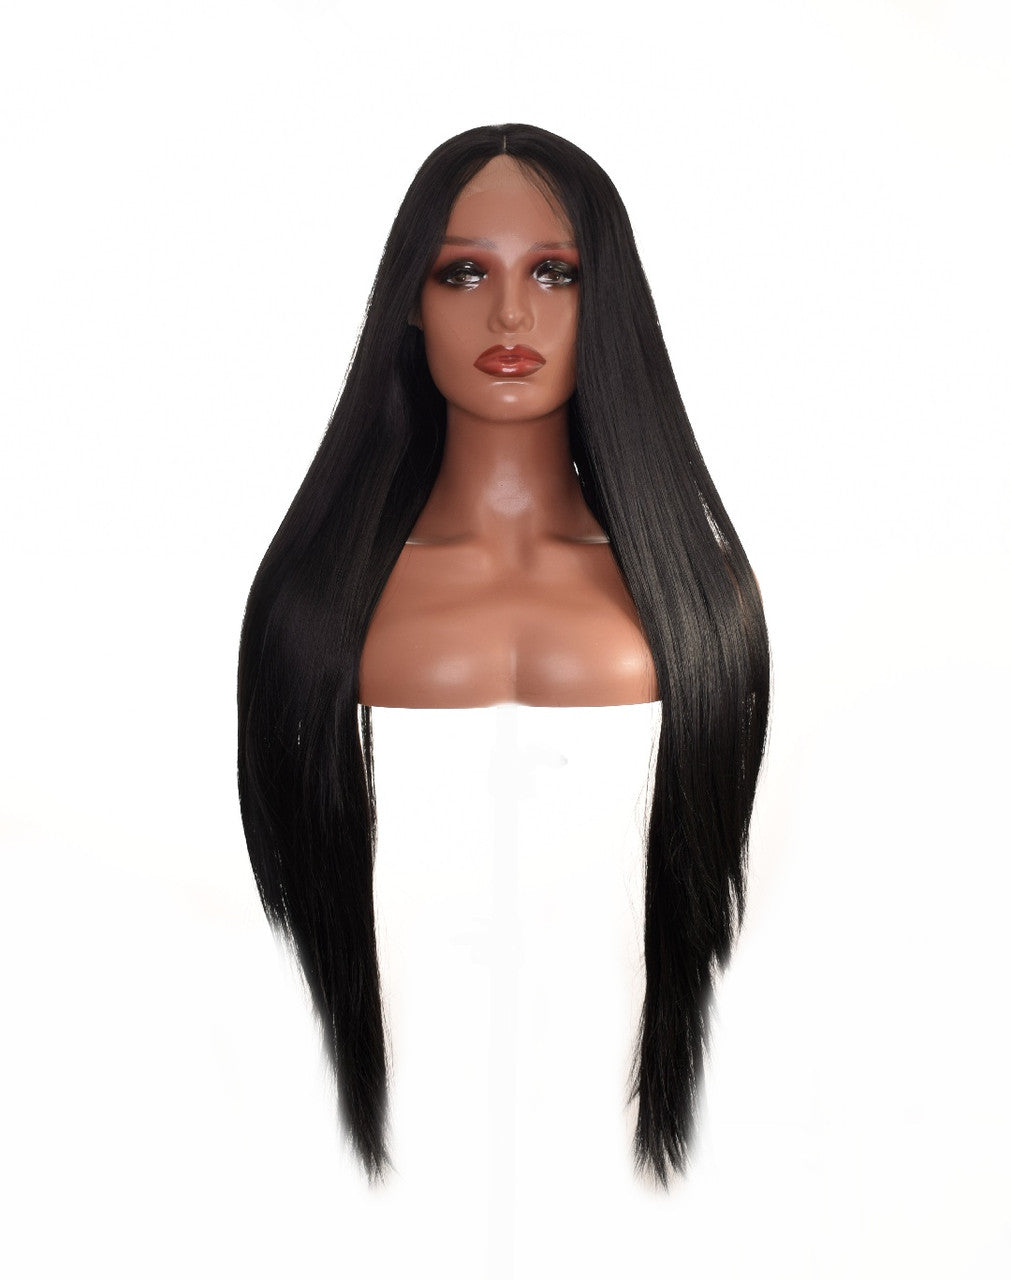 Black Godiva XL Lace Front Wig. 30 Inch Silky Straight. Vamp wig